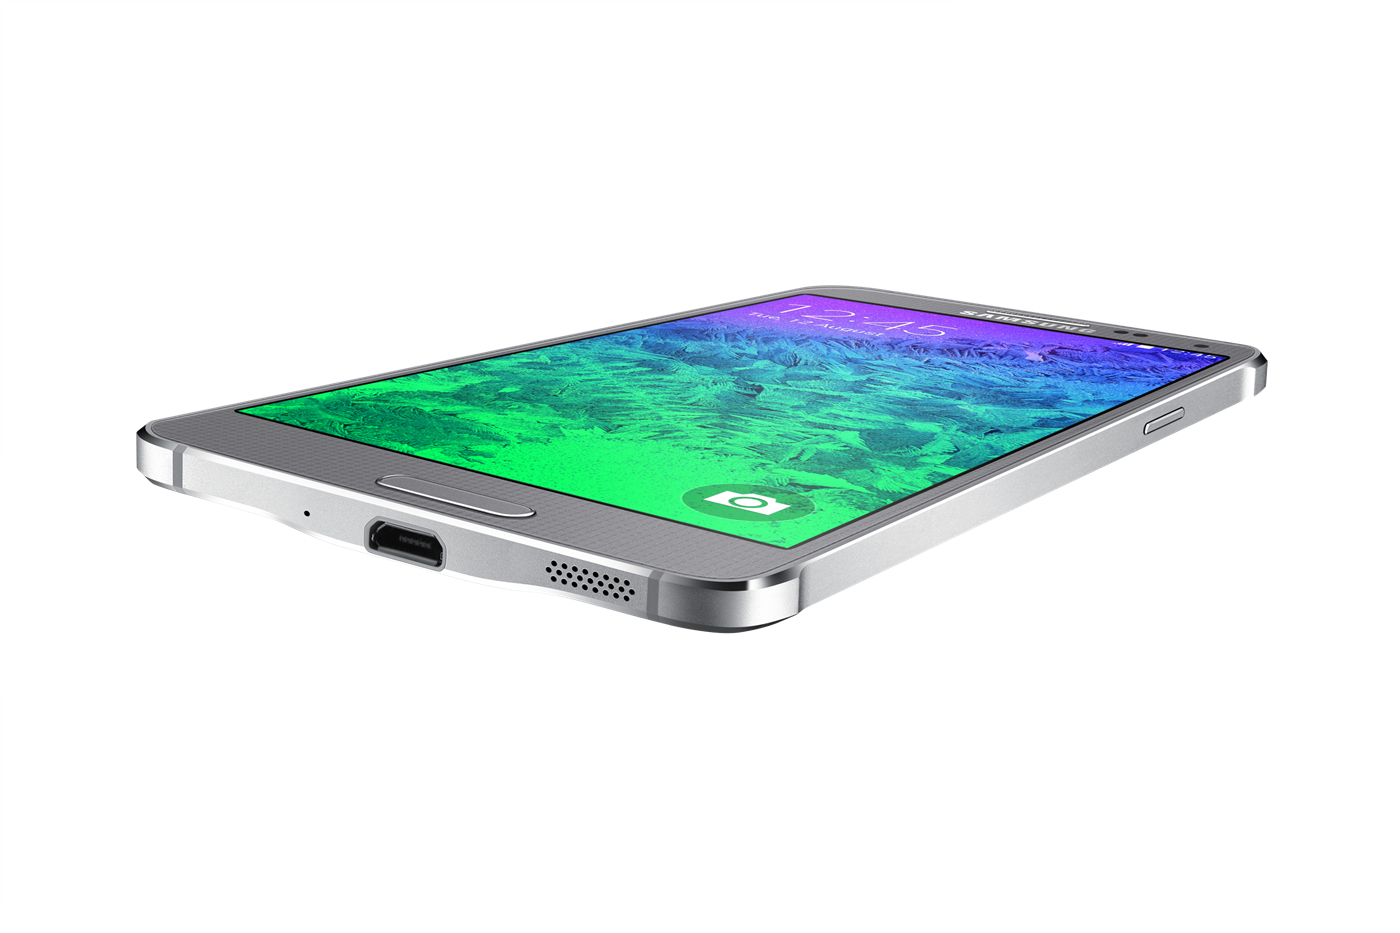 03 SM G850F 010 silver - Samsung makes the Galaxy Alpha Official with a Metal Frame